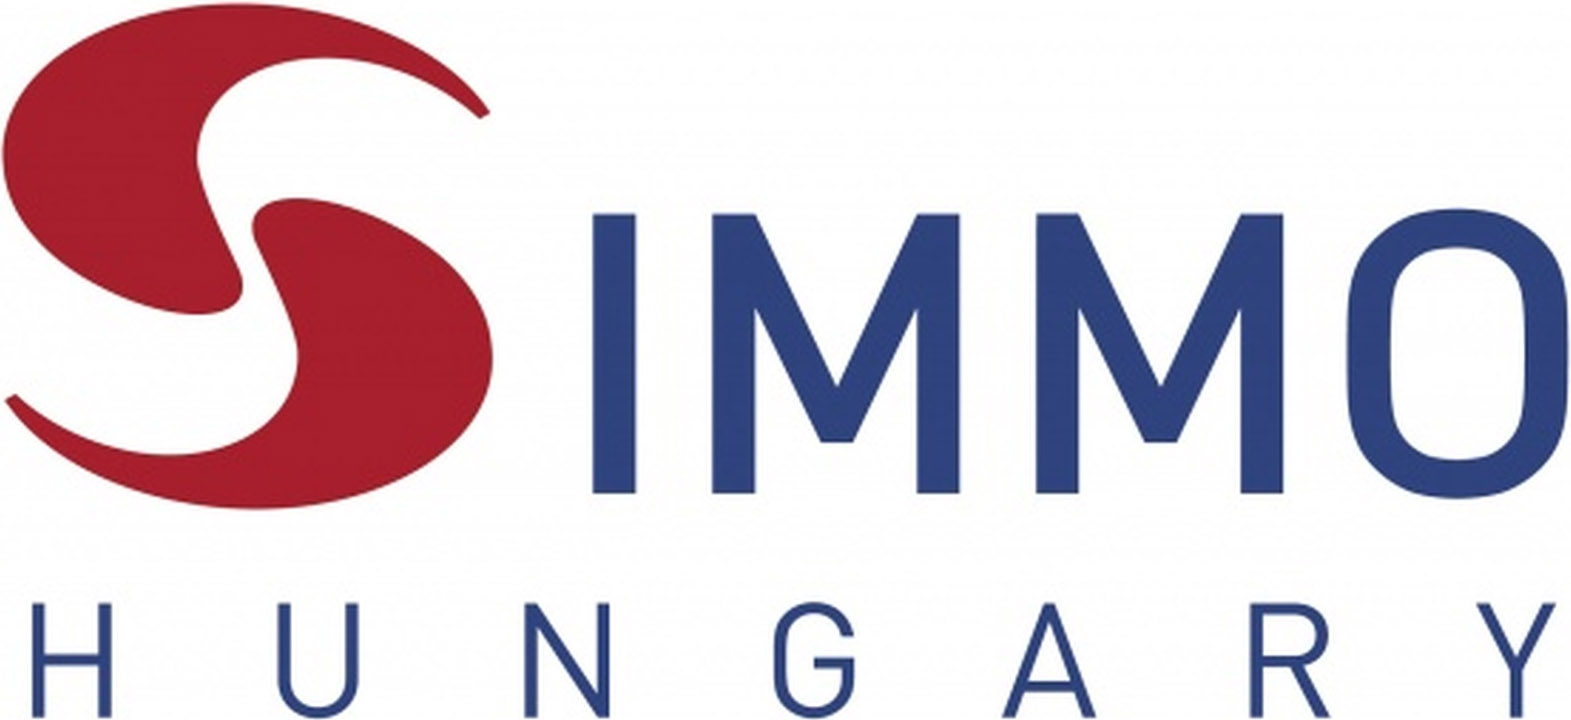 Logo of S Immo